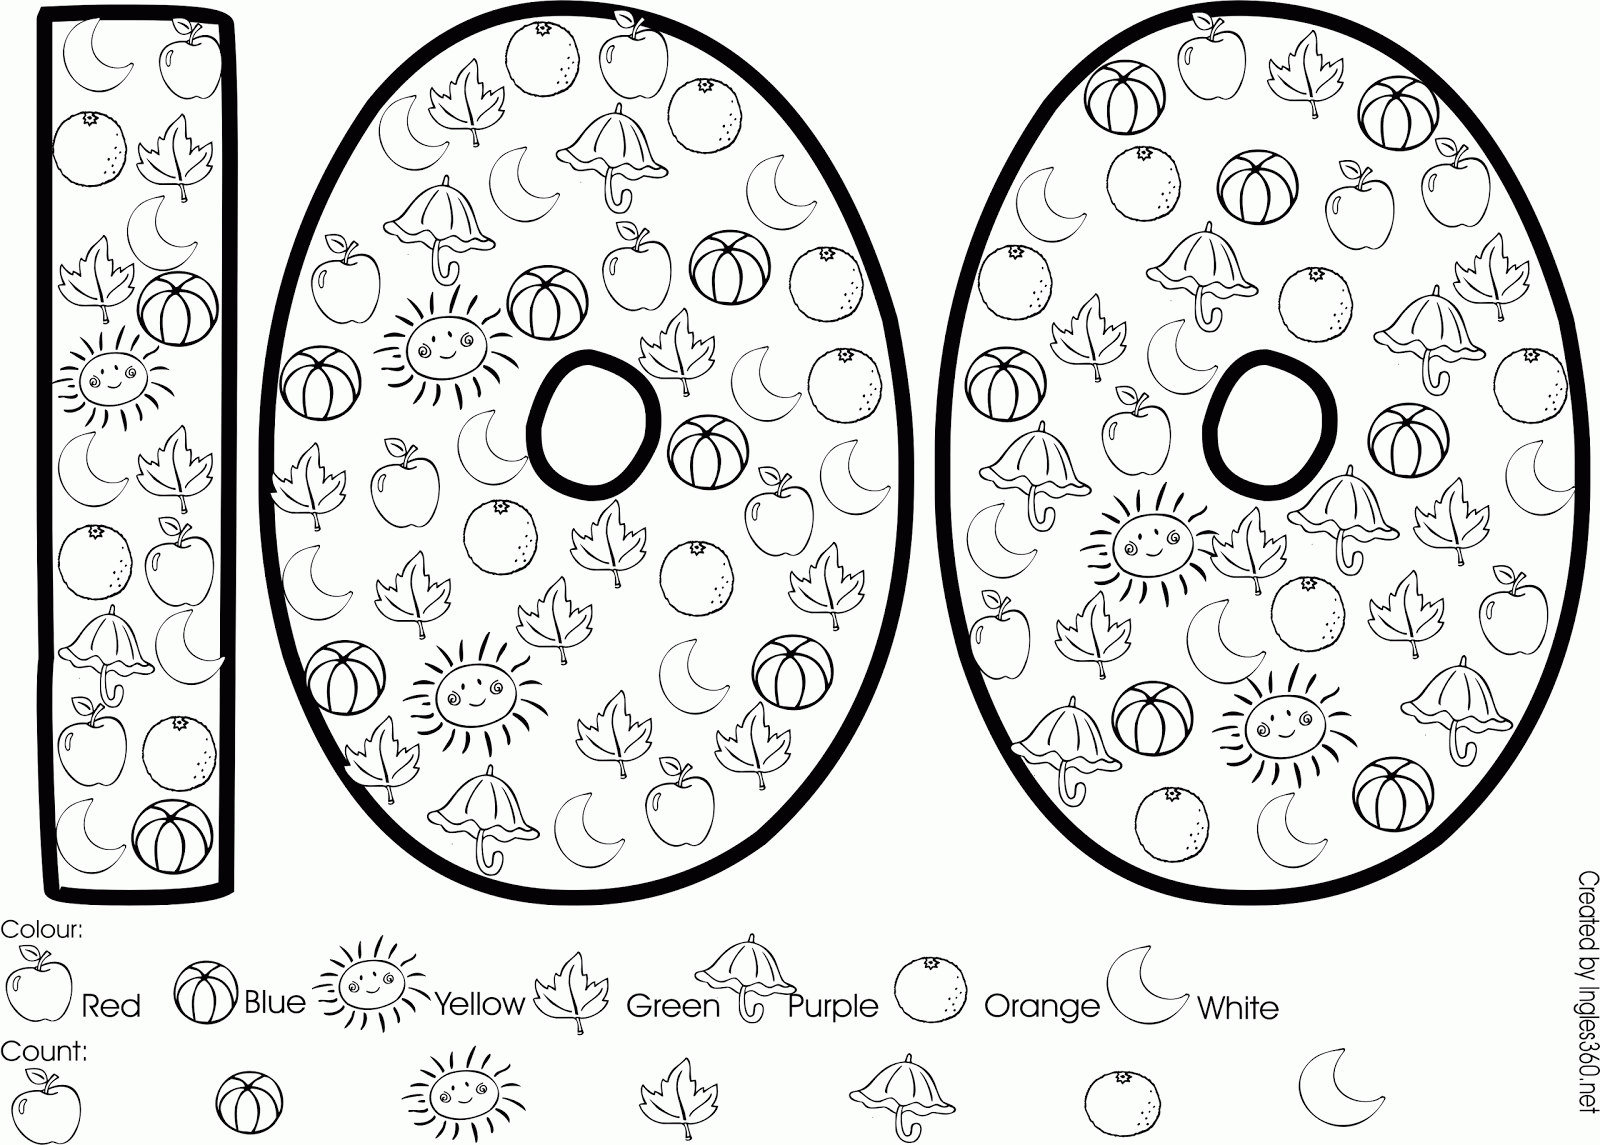 100th-day-of-school-coloring-page-0029-q1